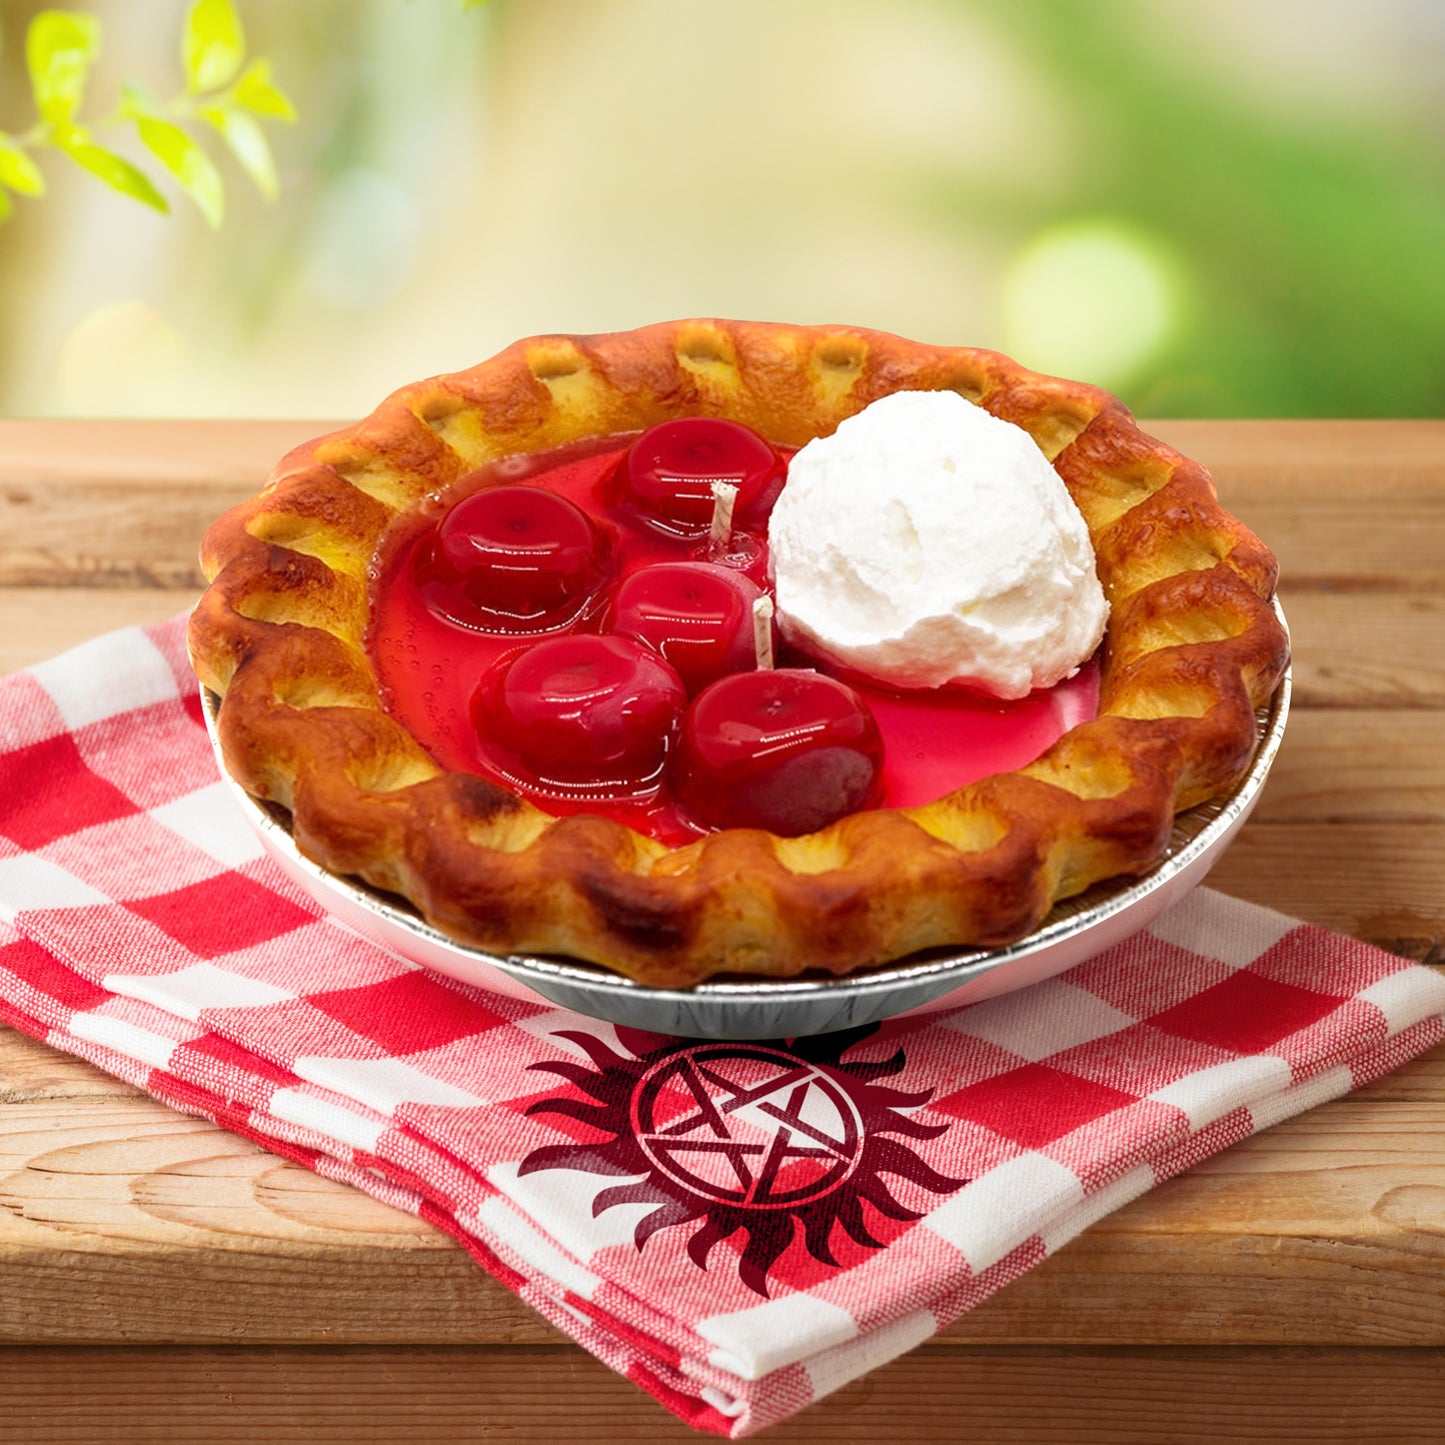 Close up view of a candle shaped like a cherry pie with whipped cream, sitting on a wooden table. Under the candle is a red and white checkered napkin with the anti-possession symbol on one corner.